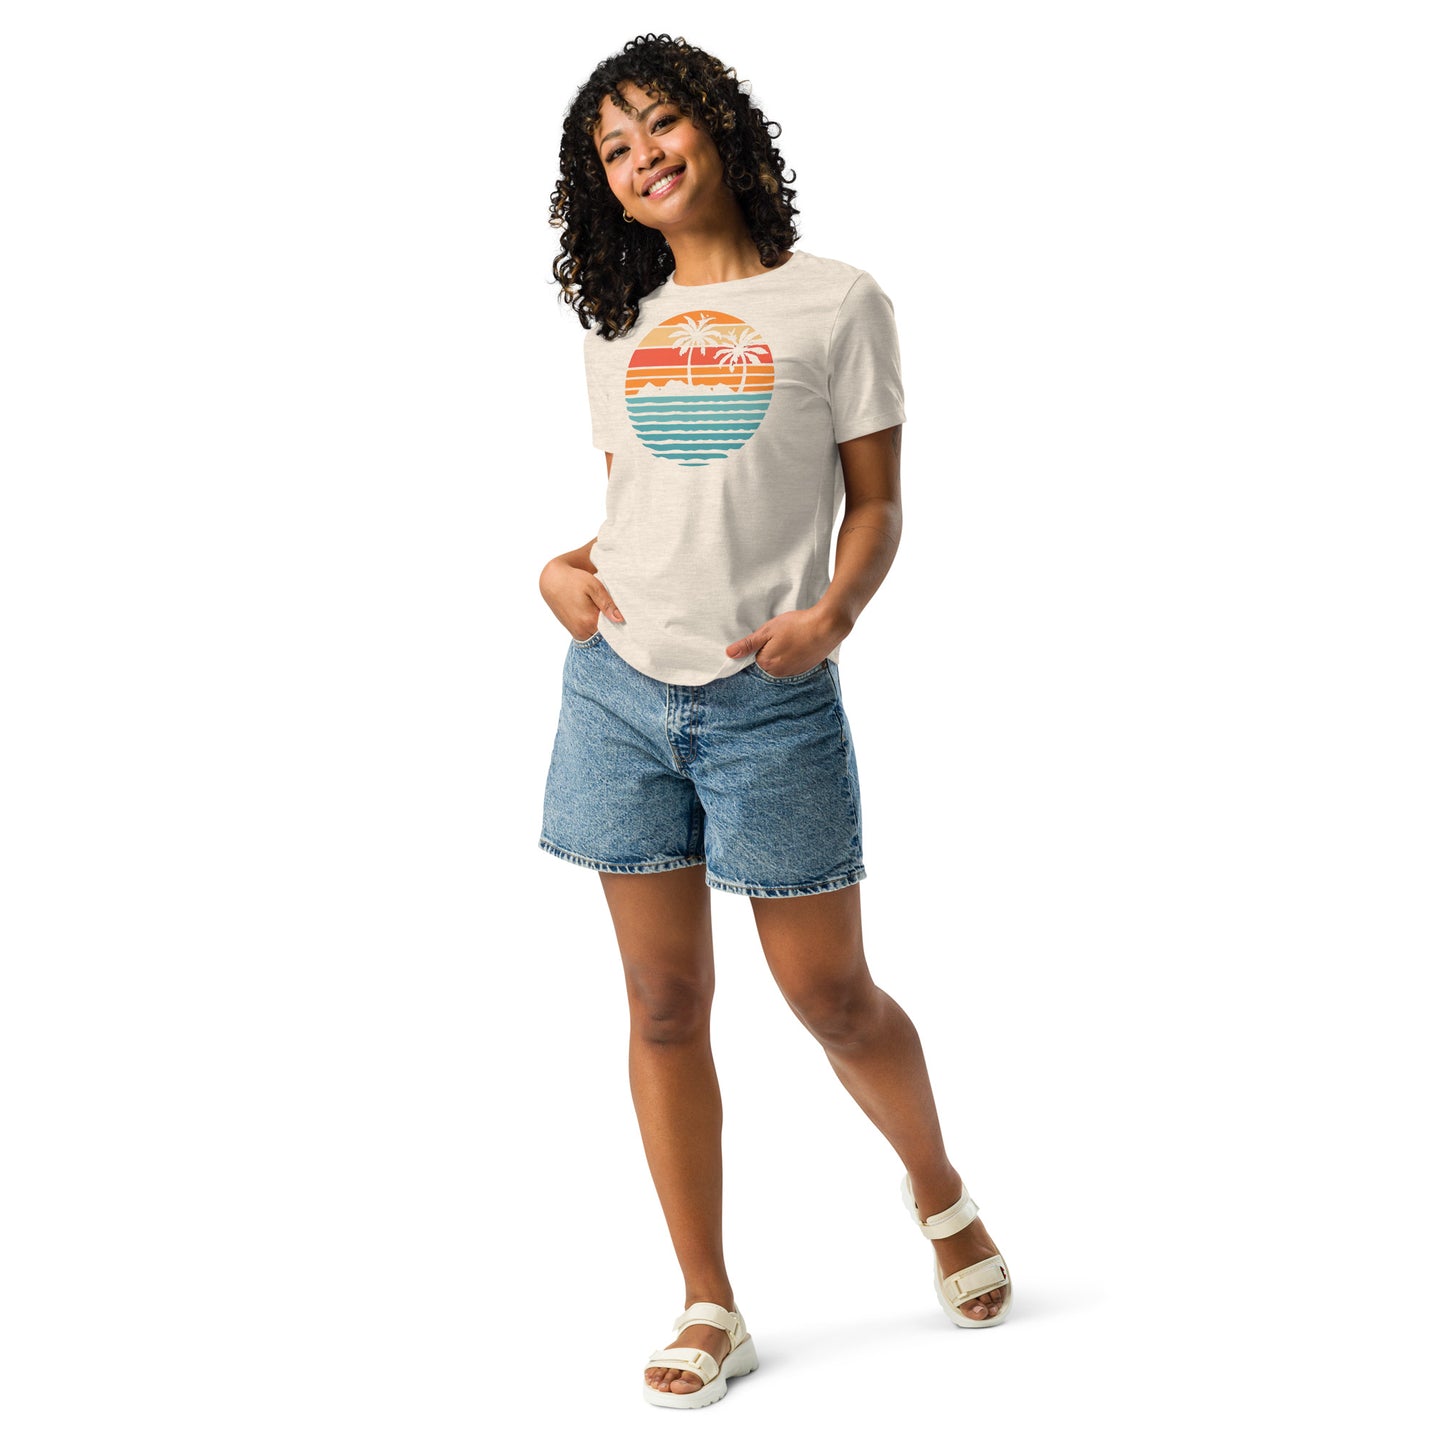 Women with naturel T-shirt and a retro Island